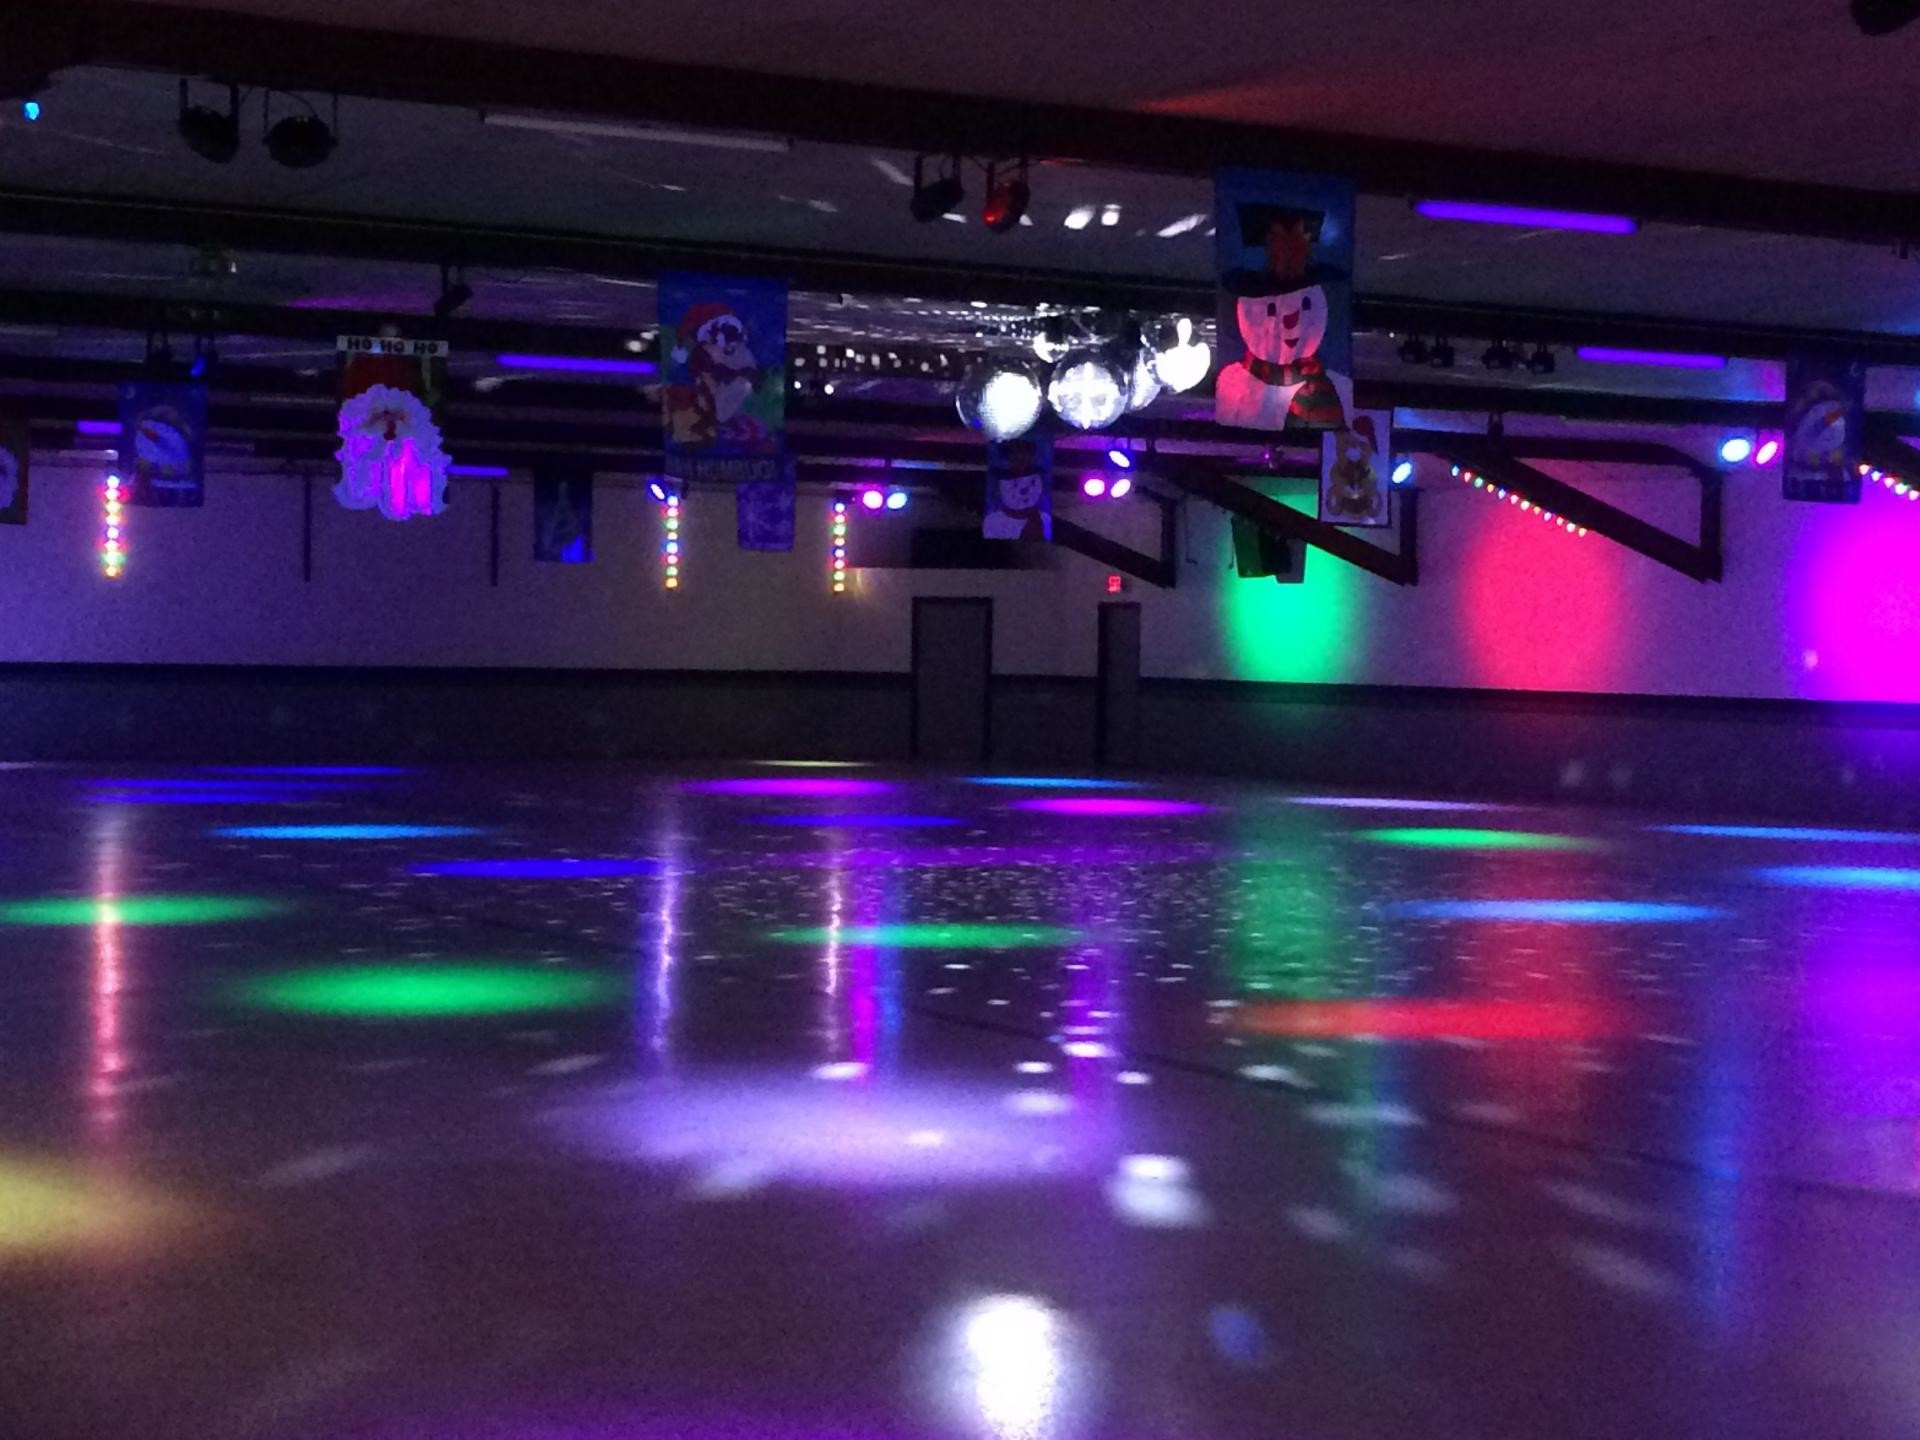 1920x1440 White Pines Roller Rink - 6929 W. Pines Rd - Mount Morris, IL -  815-846-9988 - Located on Pines Rd., across from White Pines Forest State  Park - Northern ...